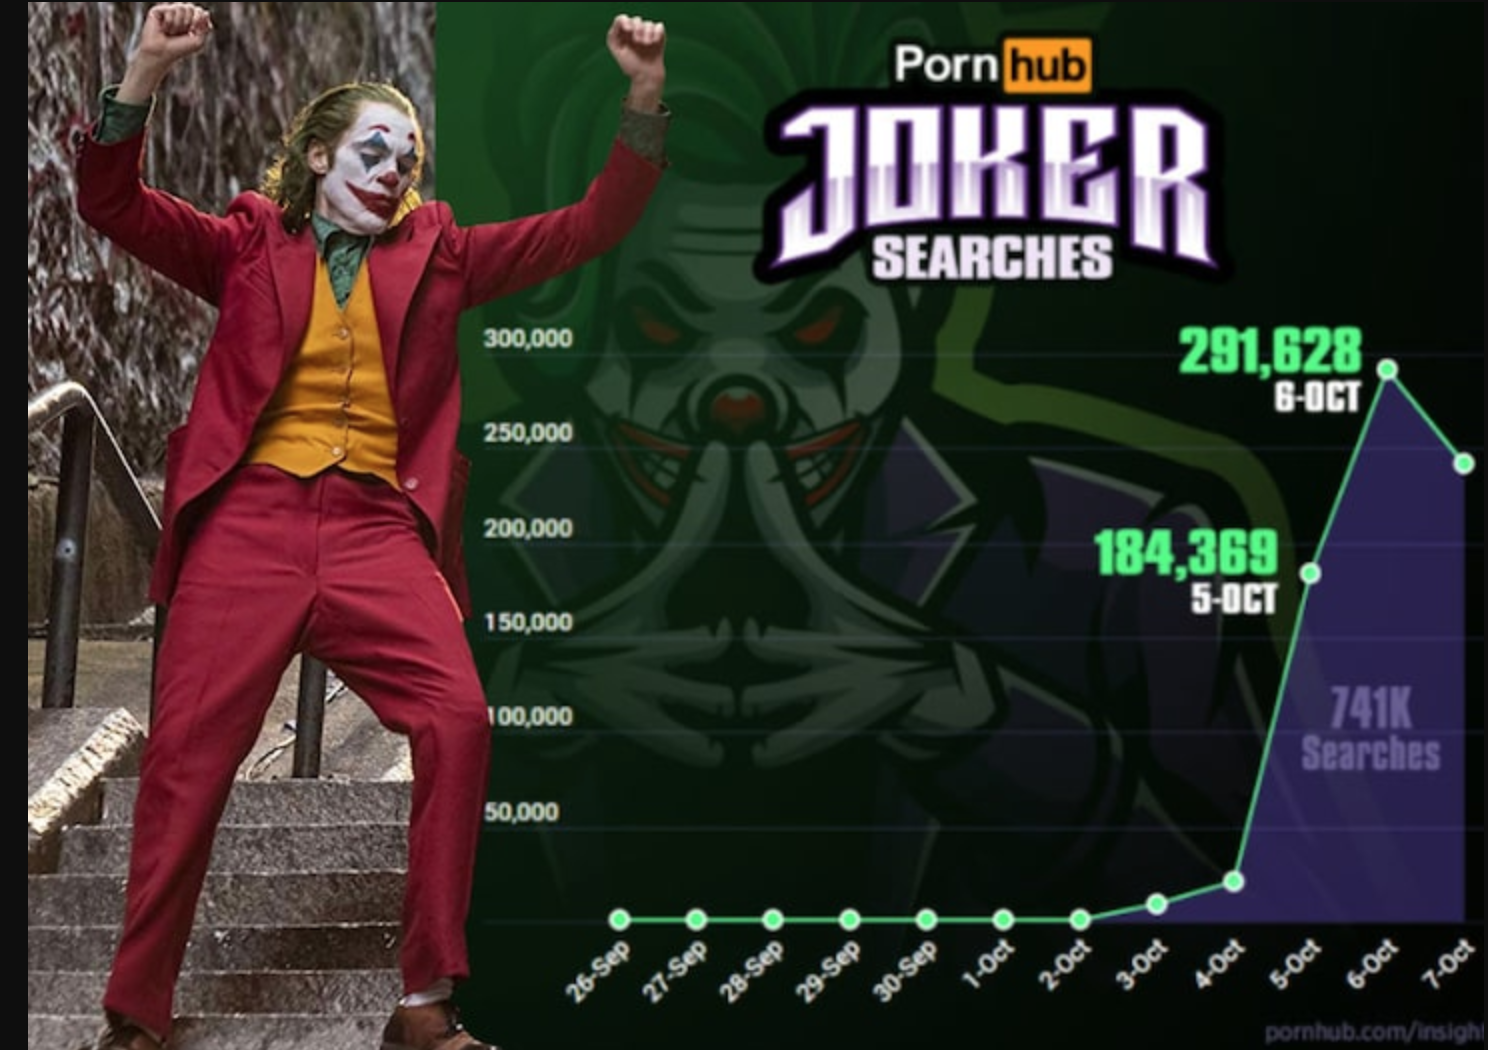 Joker Porn Searches Spike After Release Of Film - The Total Report